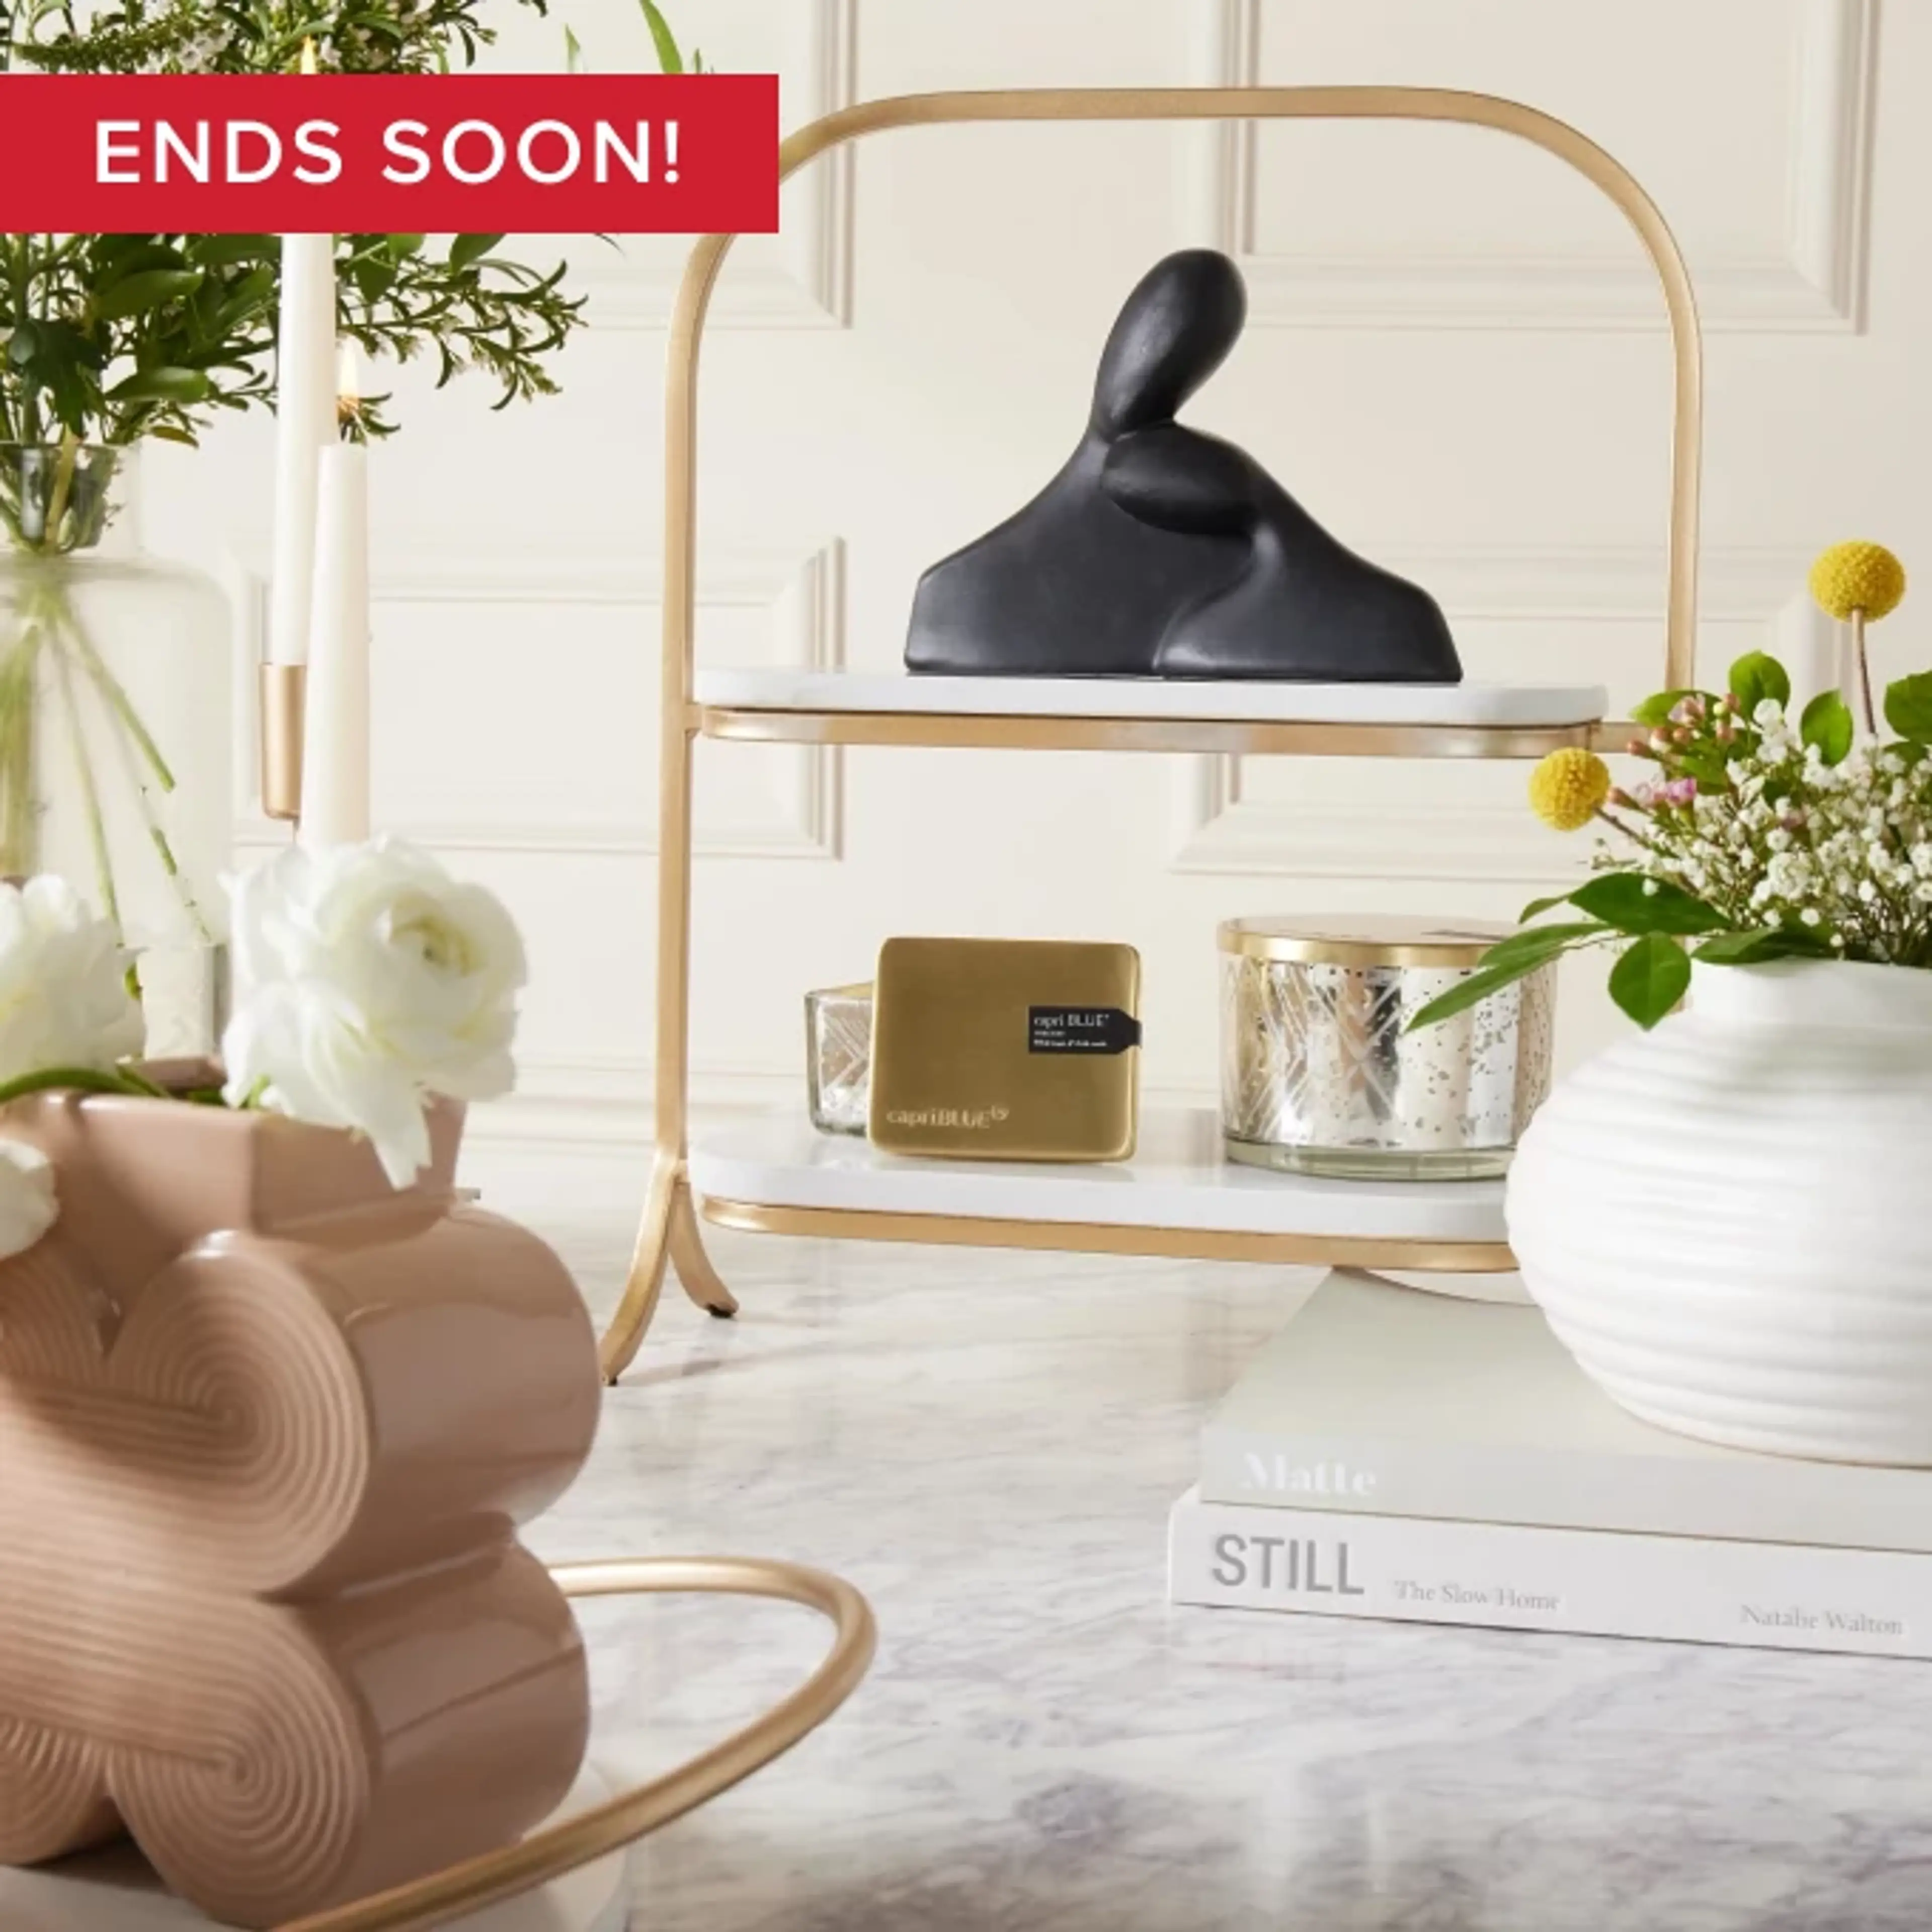 UP TO 20% OFF HOME DECOR*